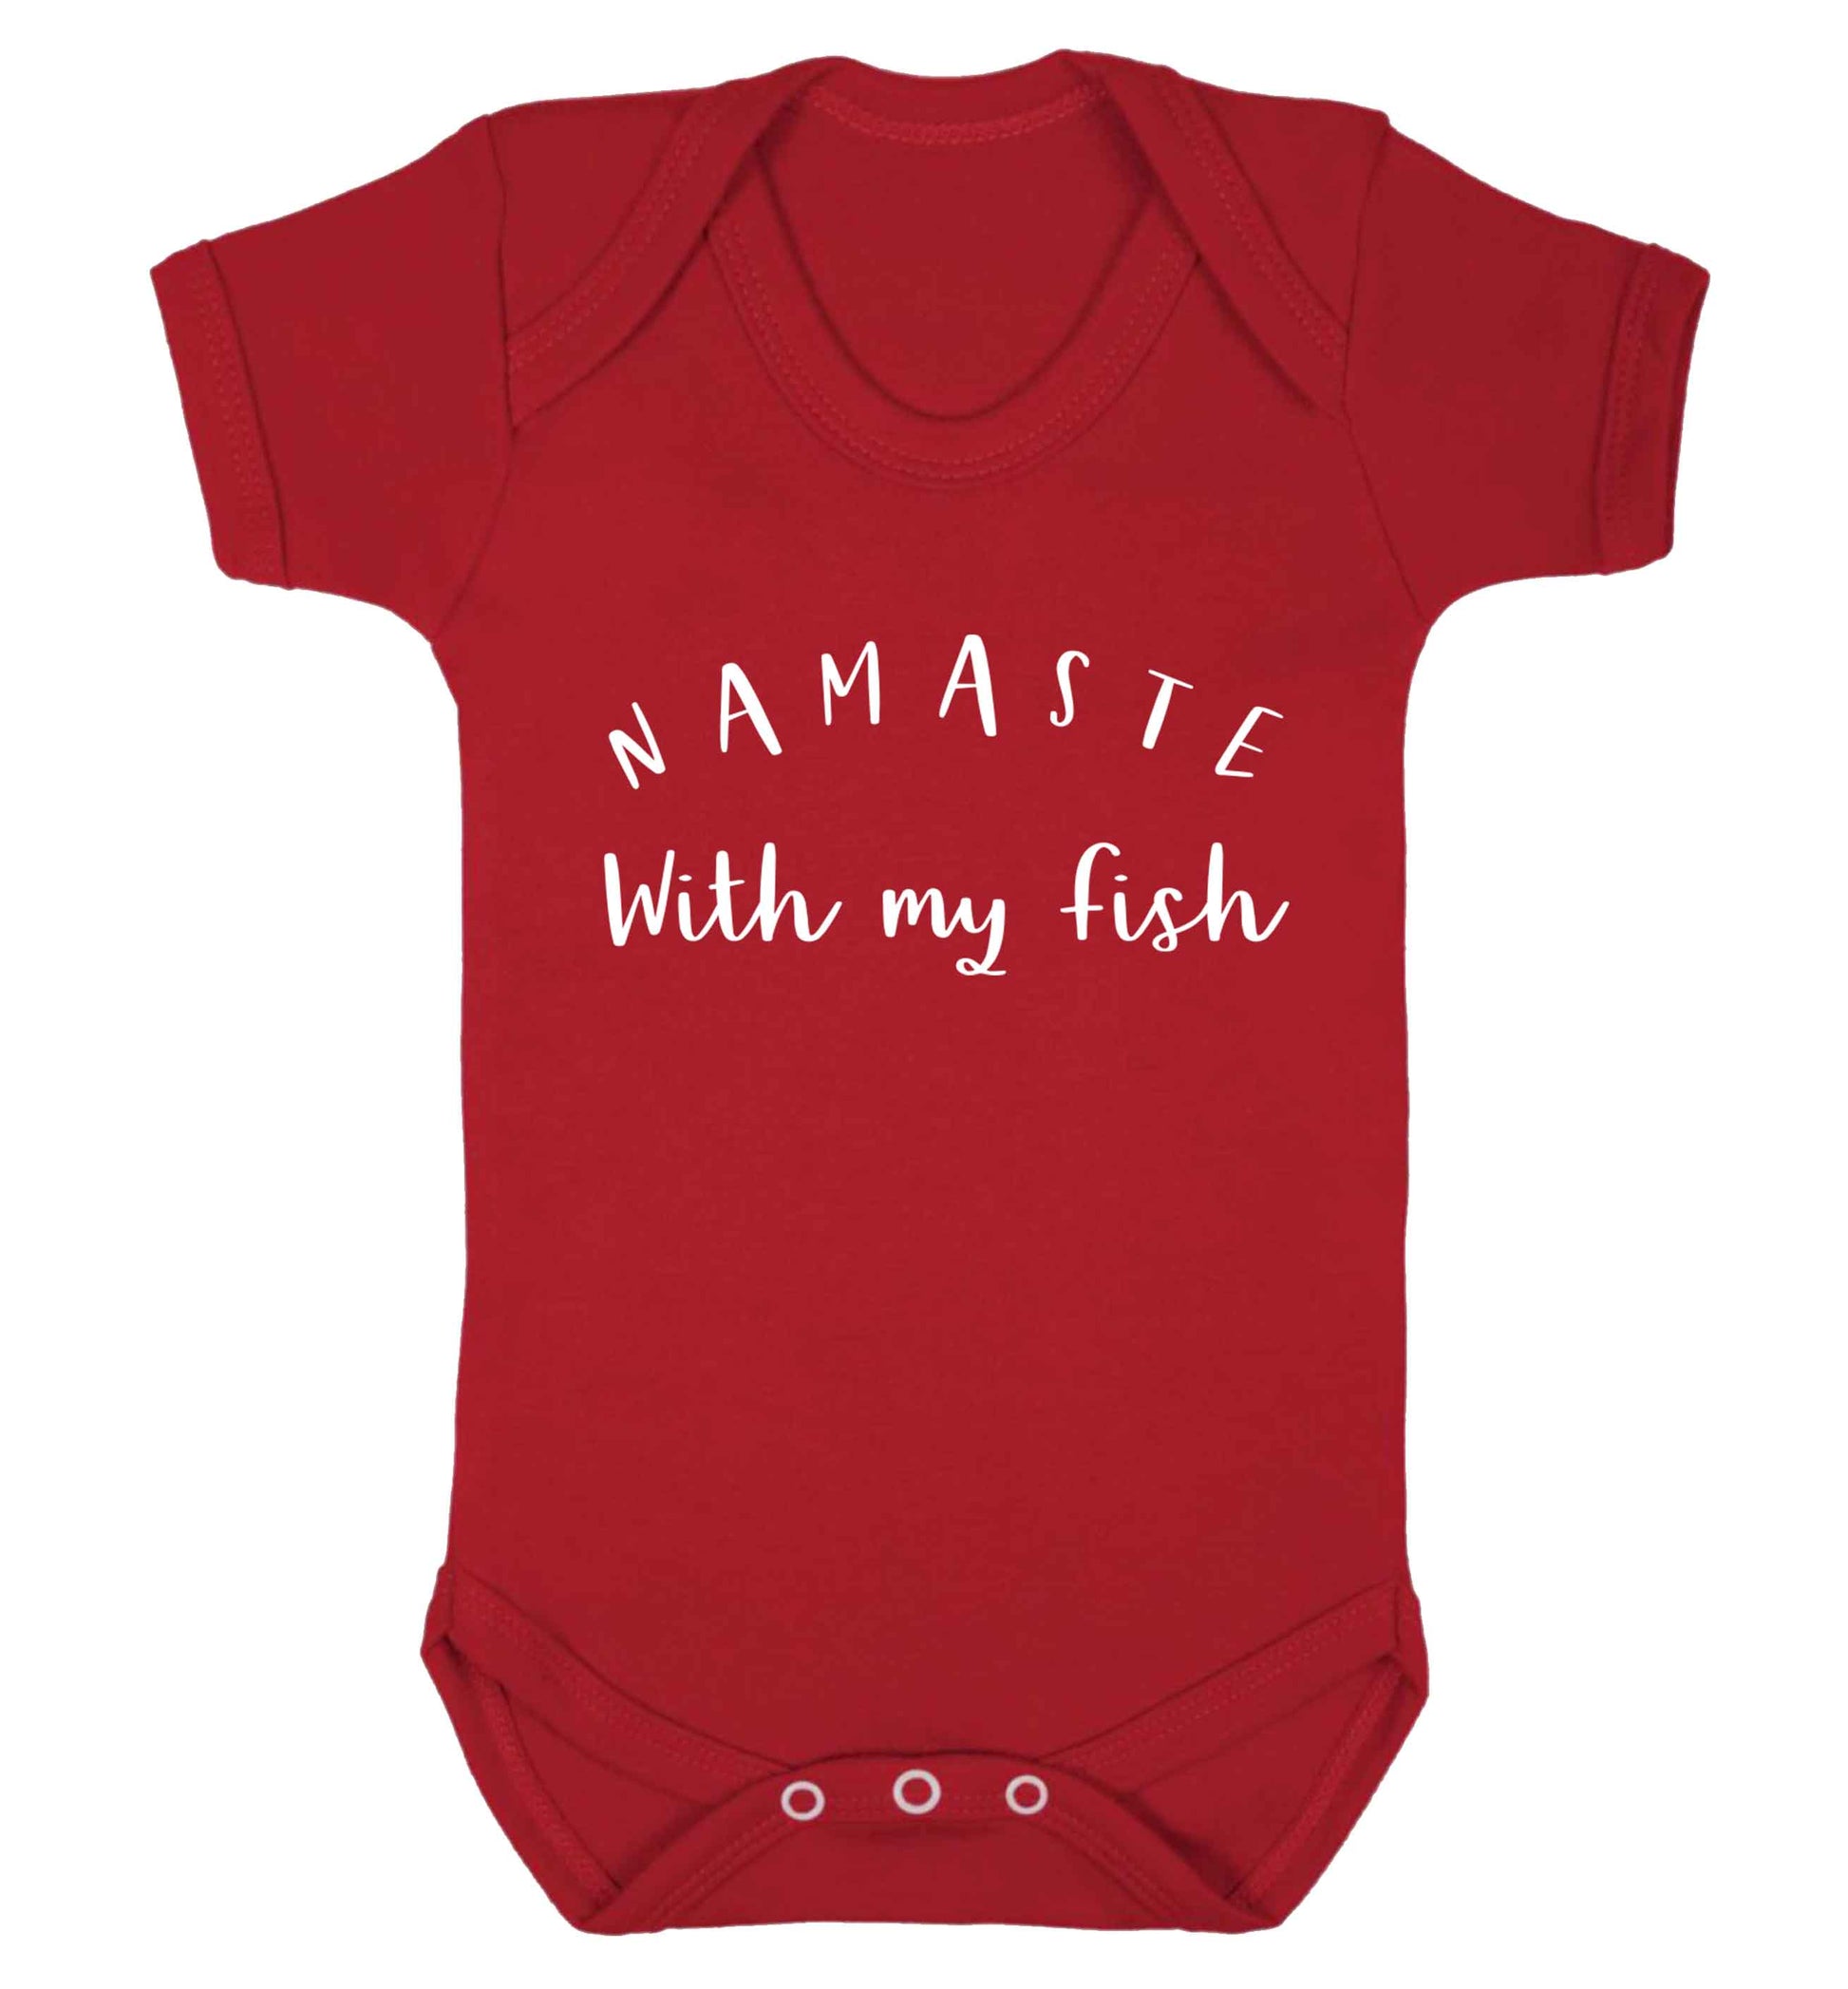 Namaste with my fish Baby Vest red 18-24 months